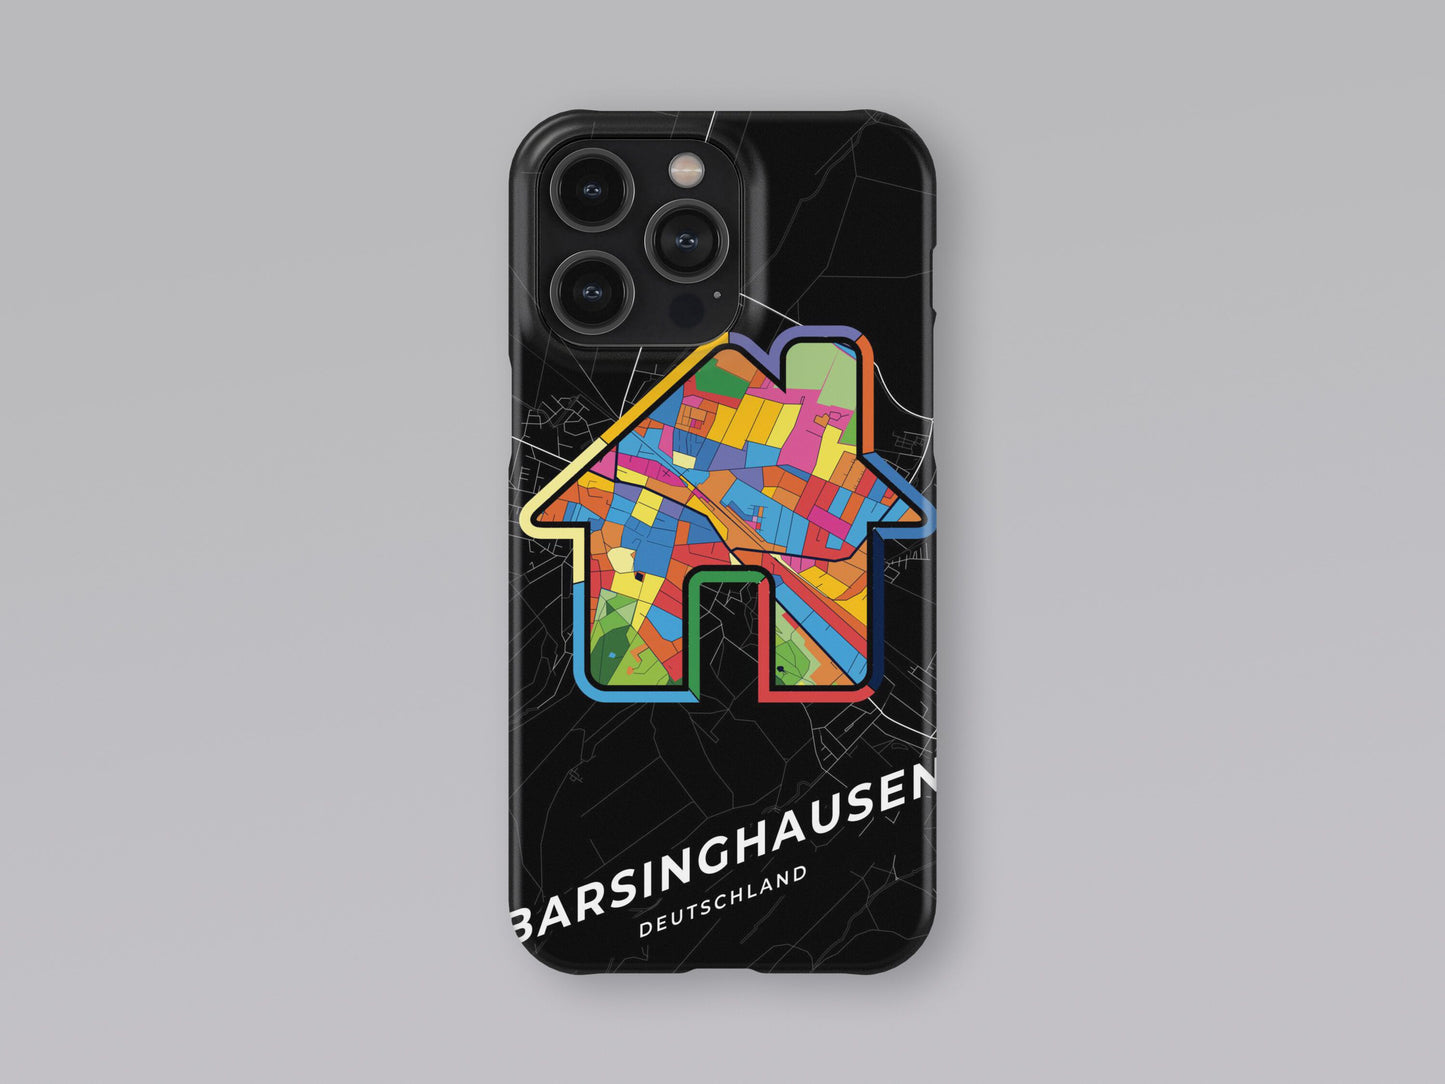 Barsinghausen Deutschland slim phone case with colorful icon. Birthday, wedding or housewarming gift. Couple match cases. 3